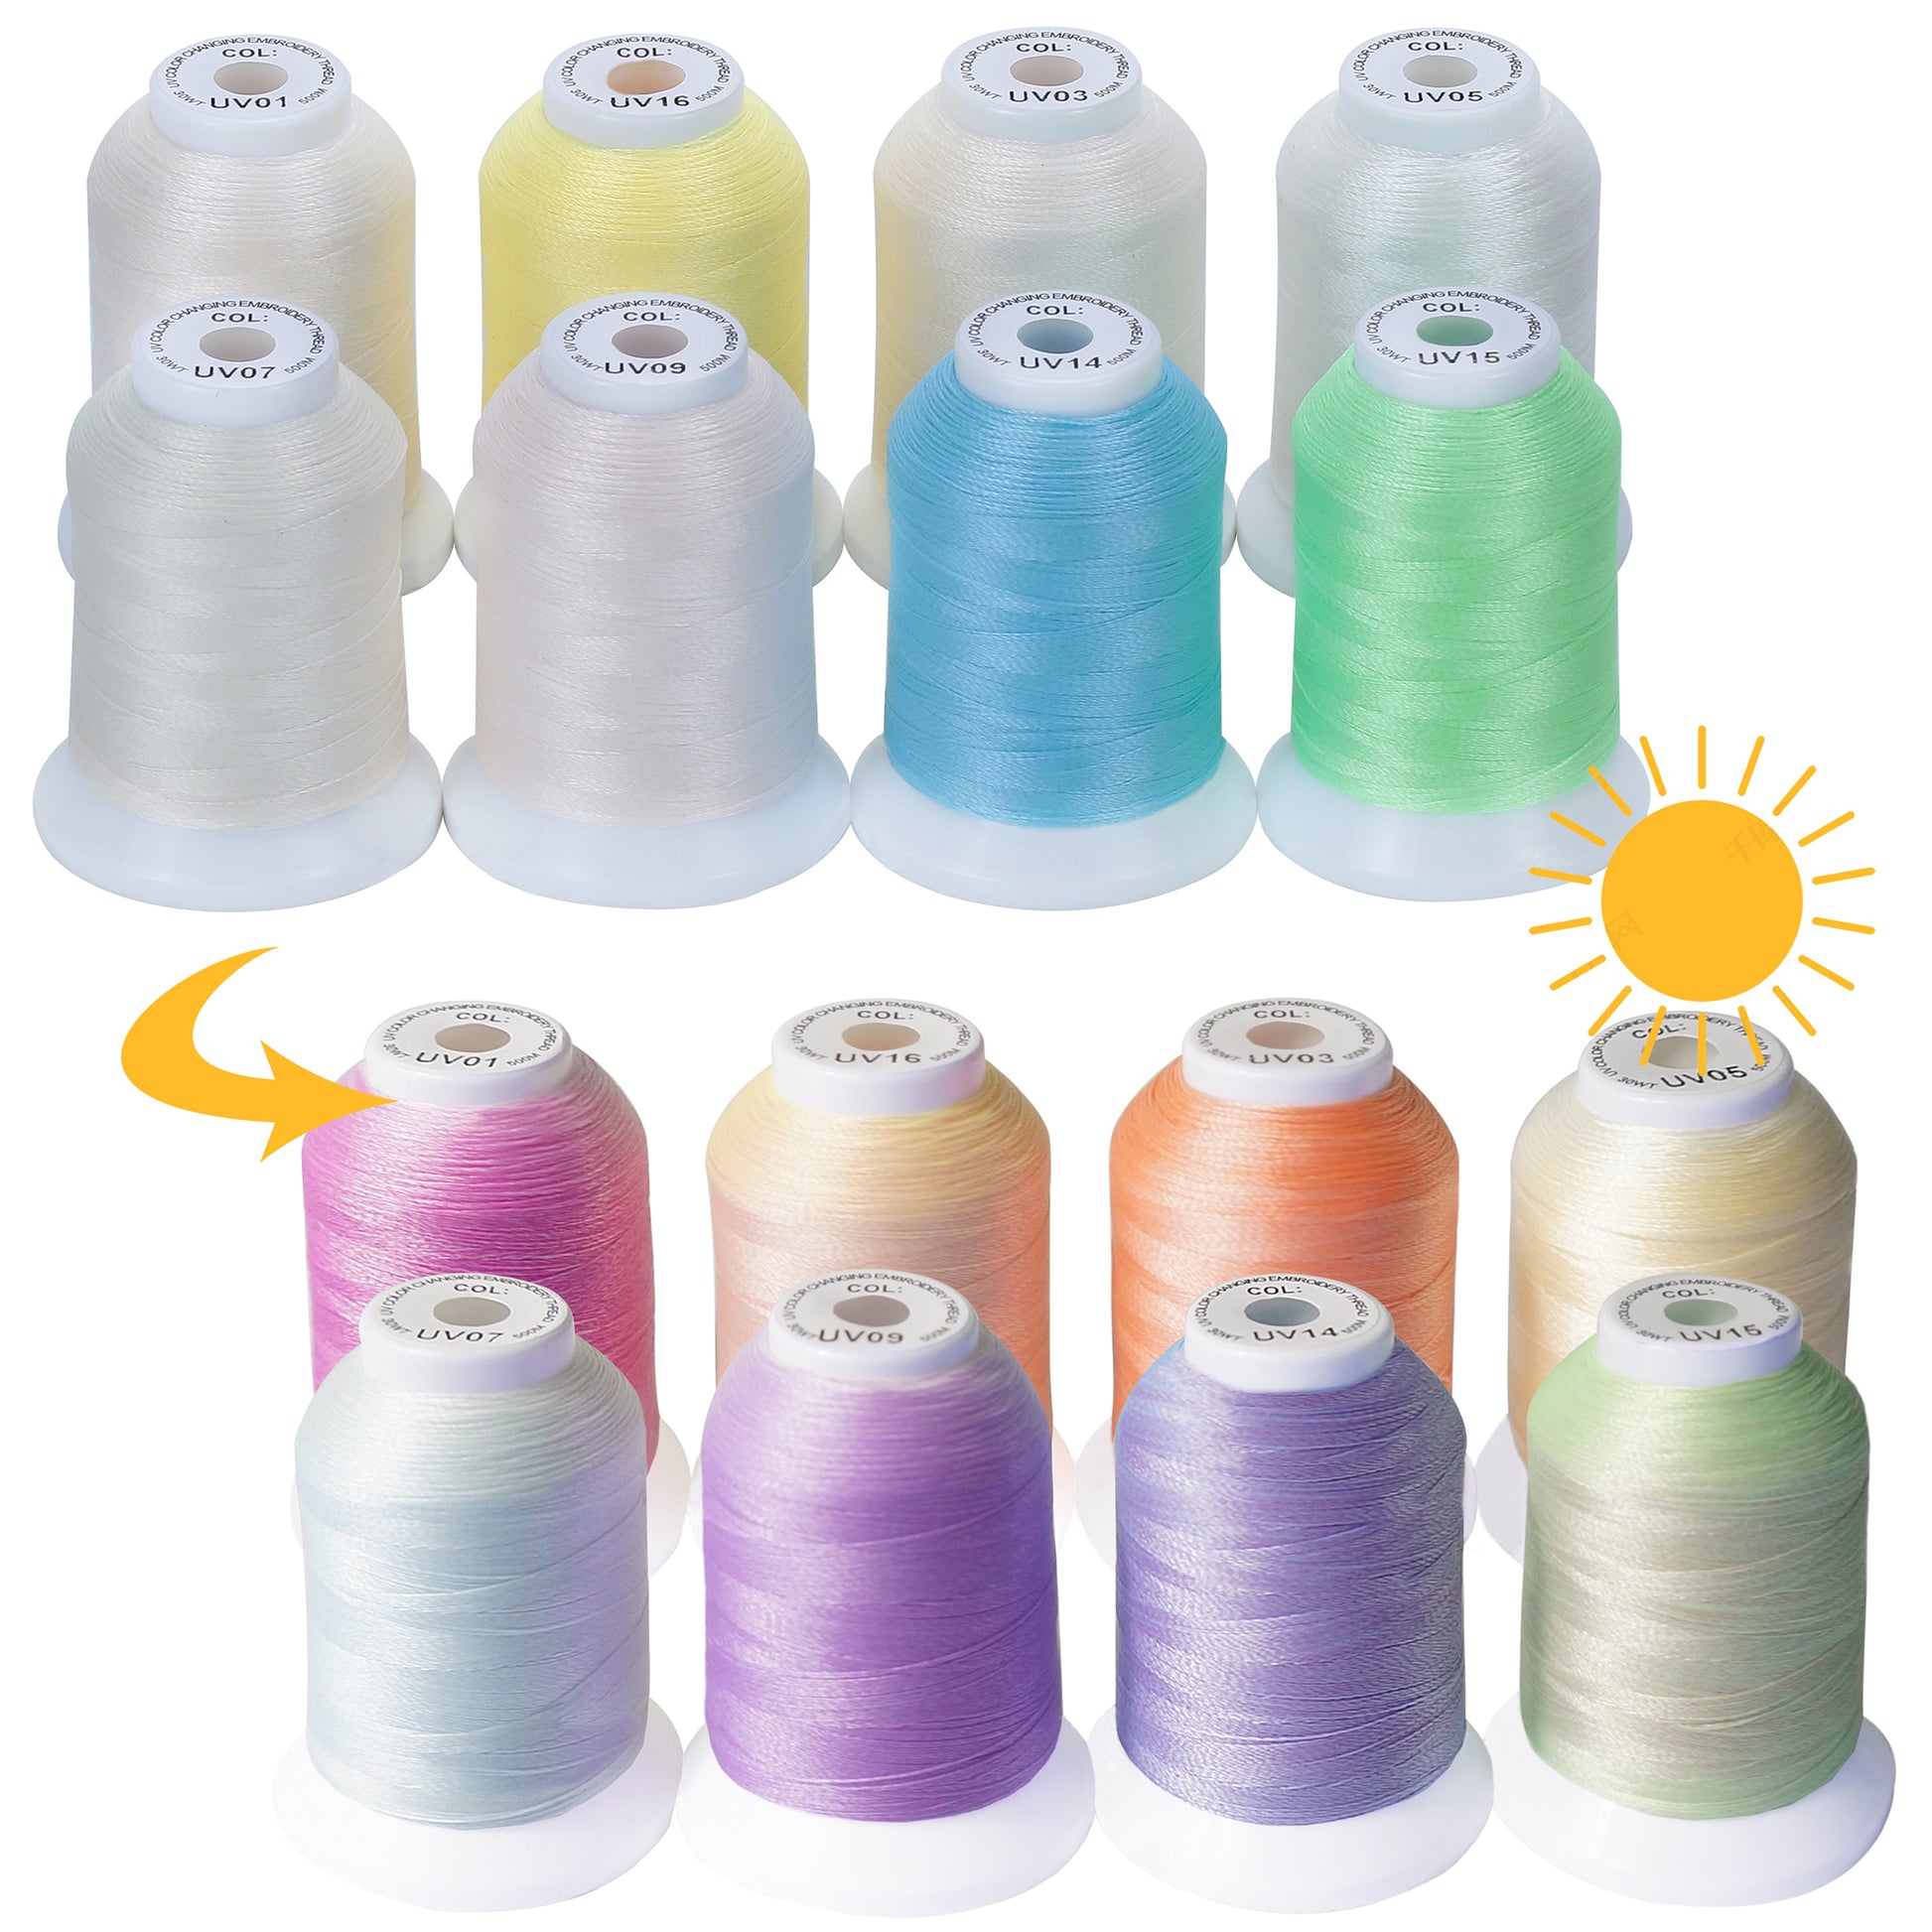 New brothread 8 Spools UV Color Changing Embroidery Machine Thread Kit